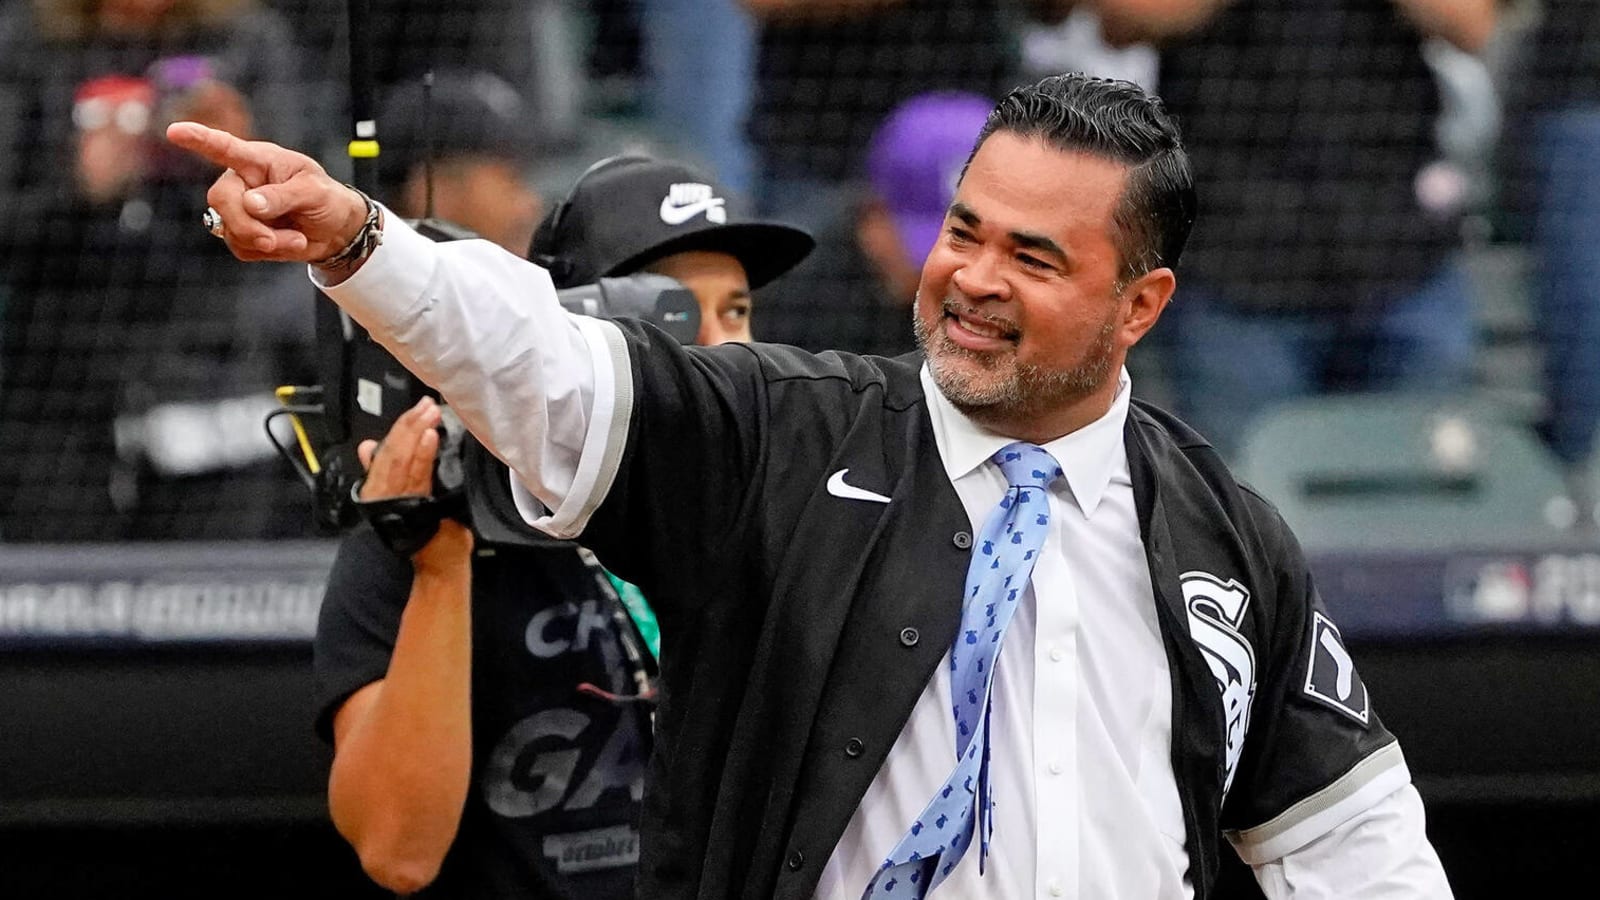 White Sox expected to interview Ozzie Guillen for manager